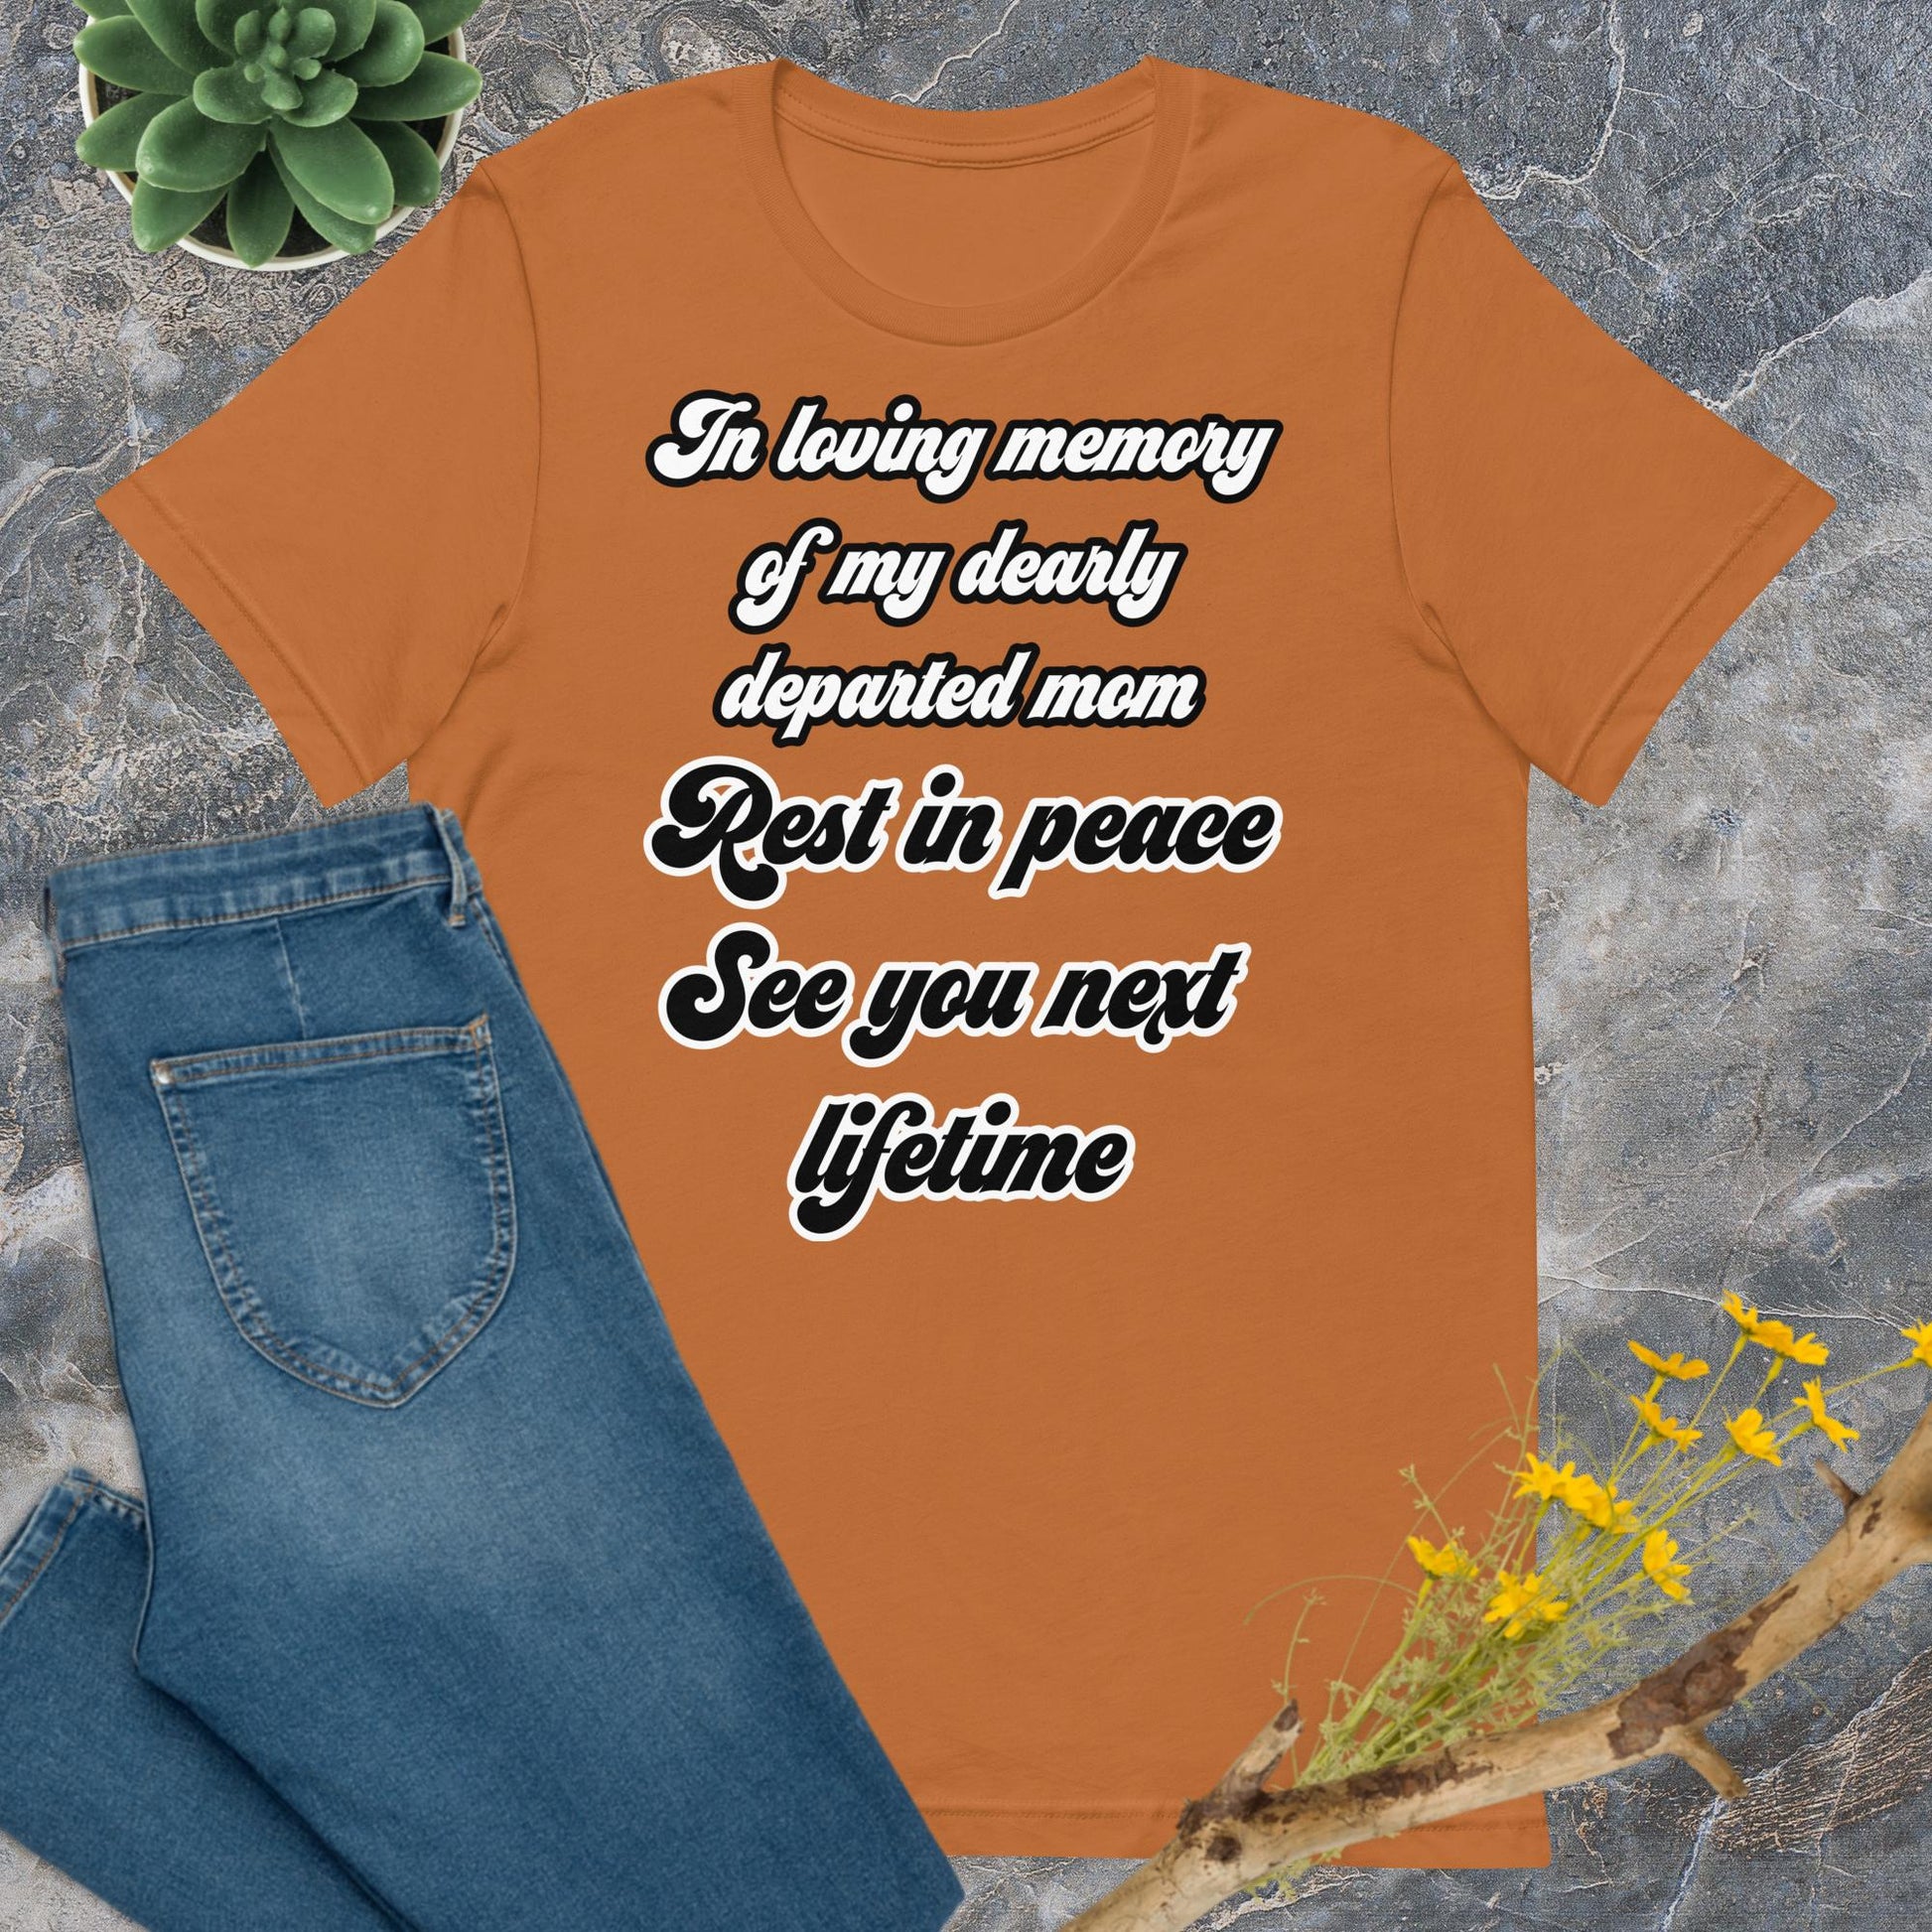 Deceased mom gifts for mother's day. Unisex Bella + Canvas 3001 T-Shirts. Toast colored (orange/brown), front view. White and black scripted written quote "In loving memory of my dearly departed mom. Rest in peace. See you next lifetime."  Shown laying flat on grey marble with blue jeans, a green succulent plant, and a brown twig with yellow flowers. Jamilliah's Wisdom Is Timeless Shop - wisdomistimeless.com.